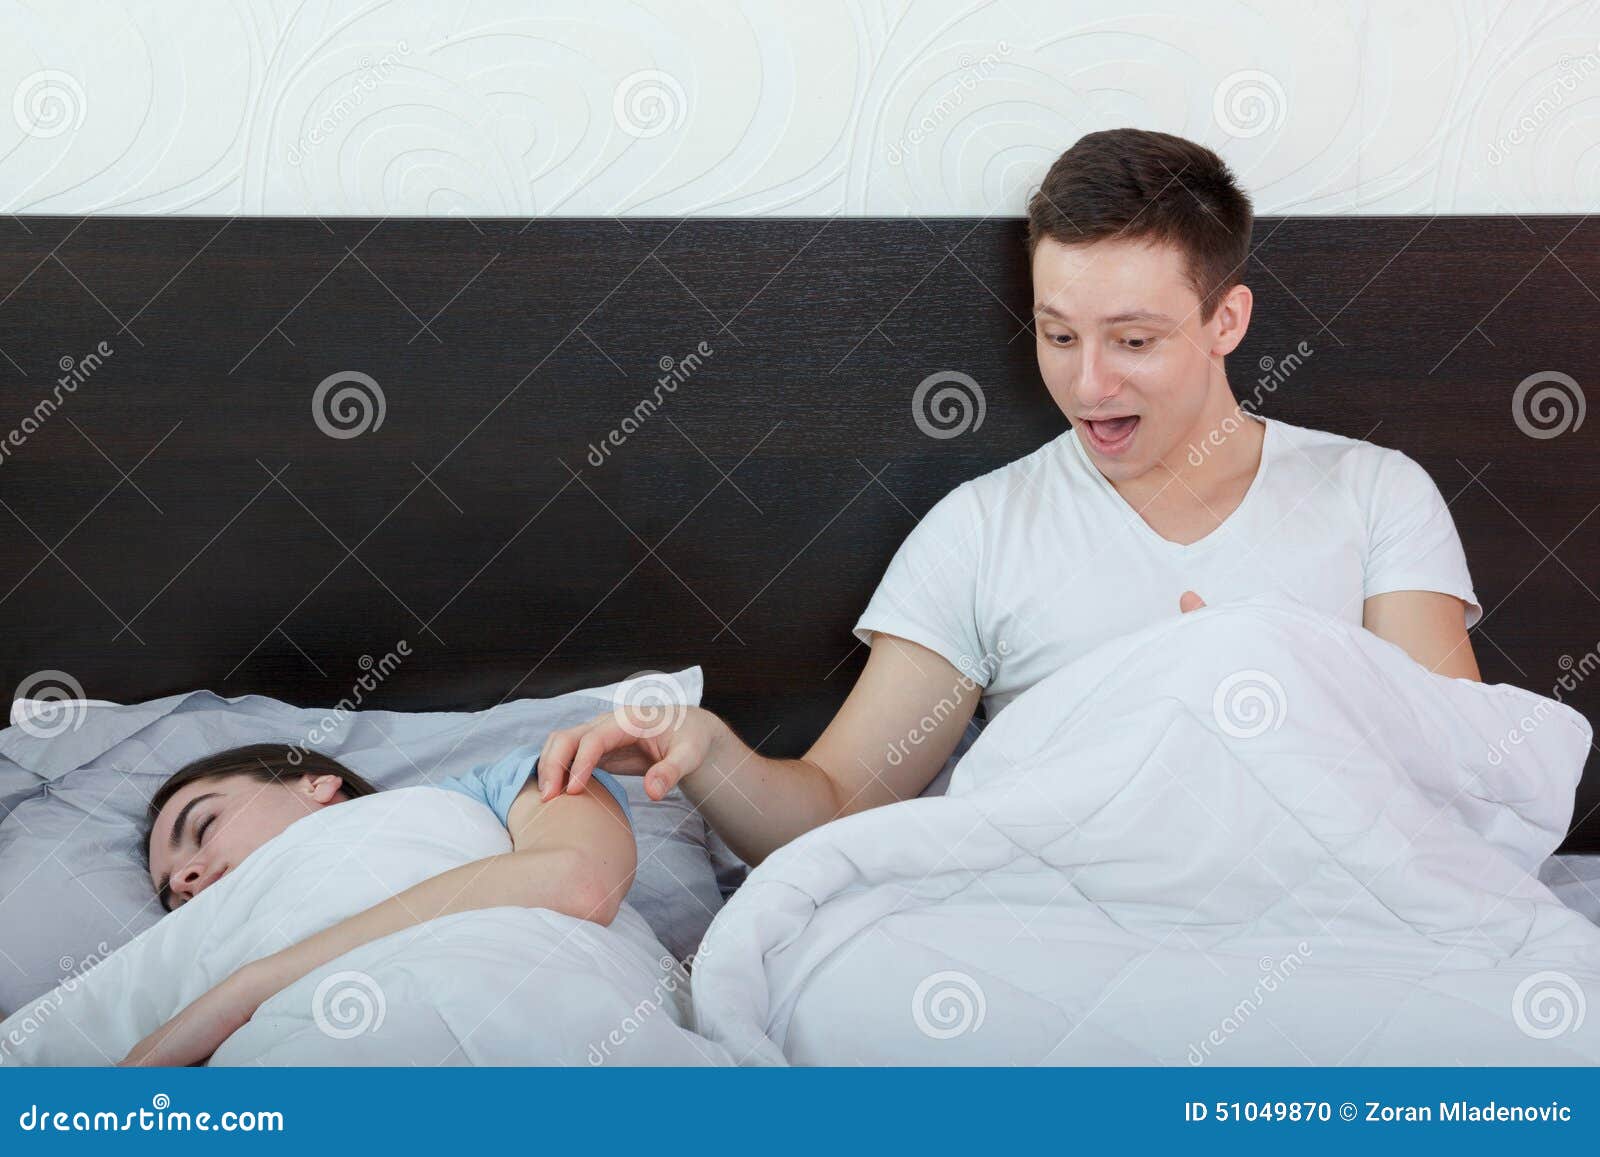 Man Having Problem with Impotence Sitting on Bed Waking Up His Stock Photo  pic picture